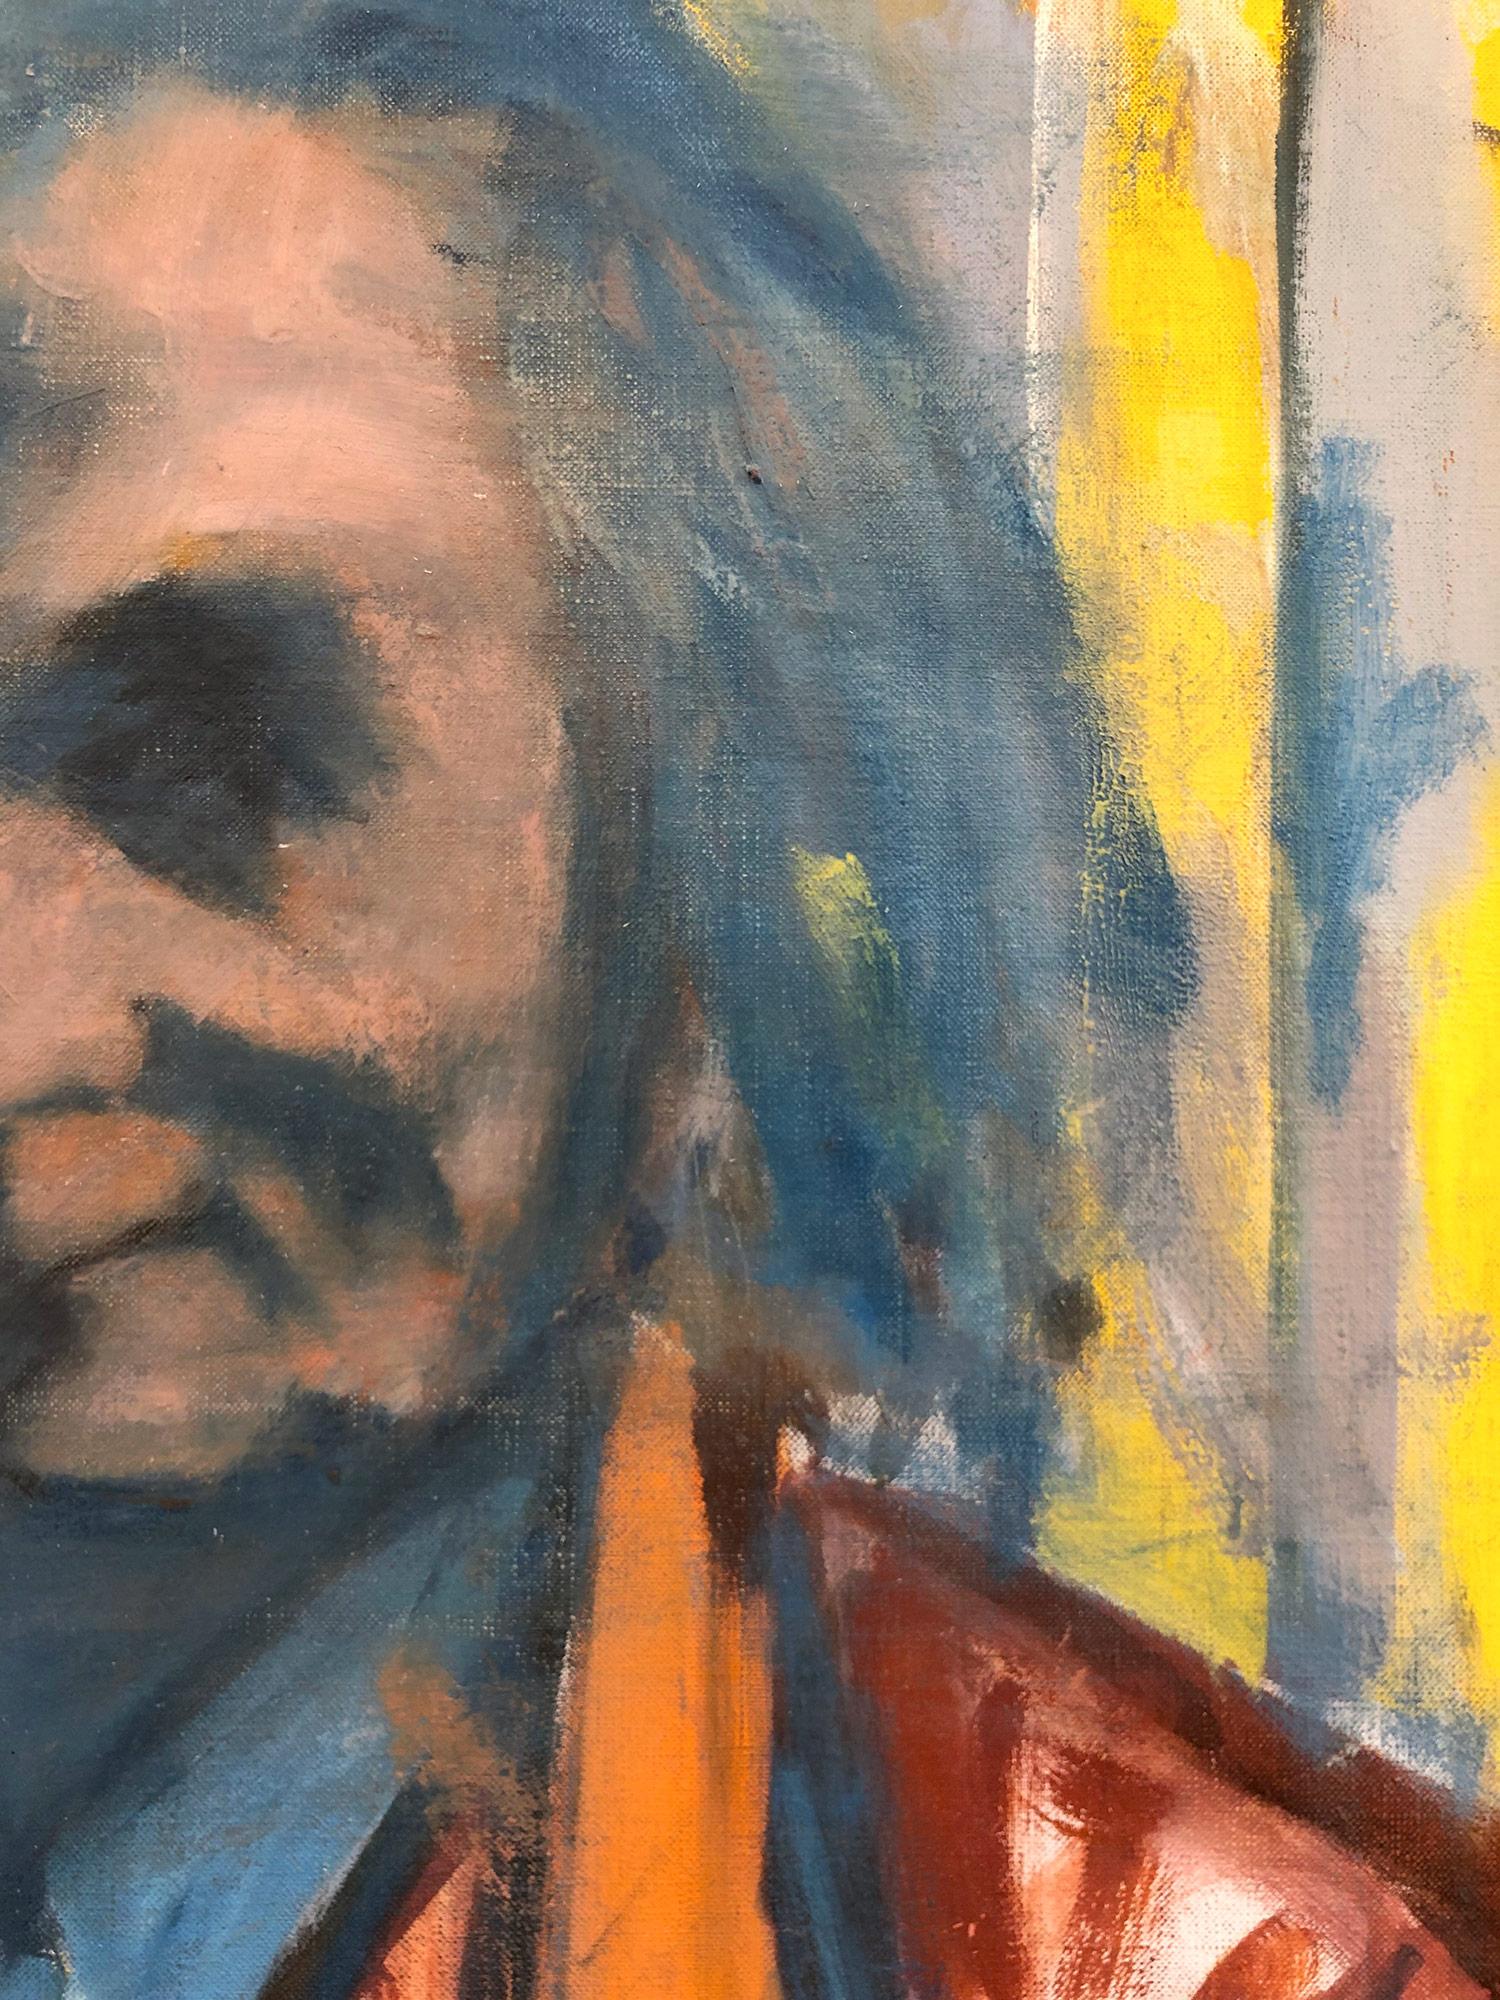 This piece is part of Elaine de Kooning's portraits collection. Aristodemos Kaldis was a dear friend of Elaine de Kooning, having exhibited his portraits in France in the 1980s. Her use of vibrant color and fast brushwork creates dynamic and